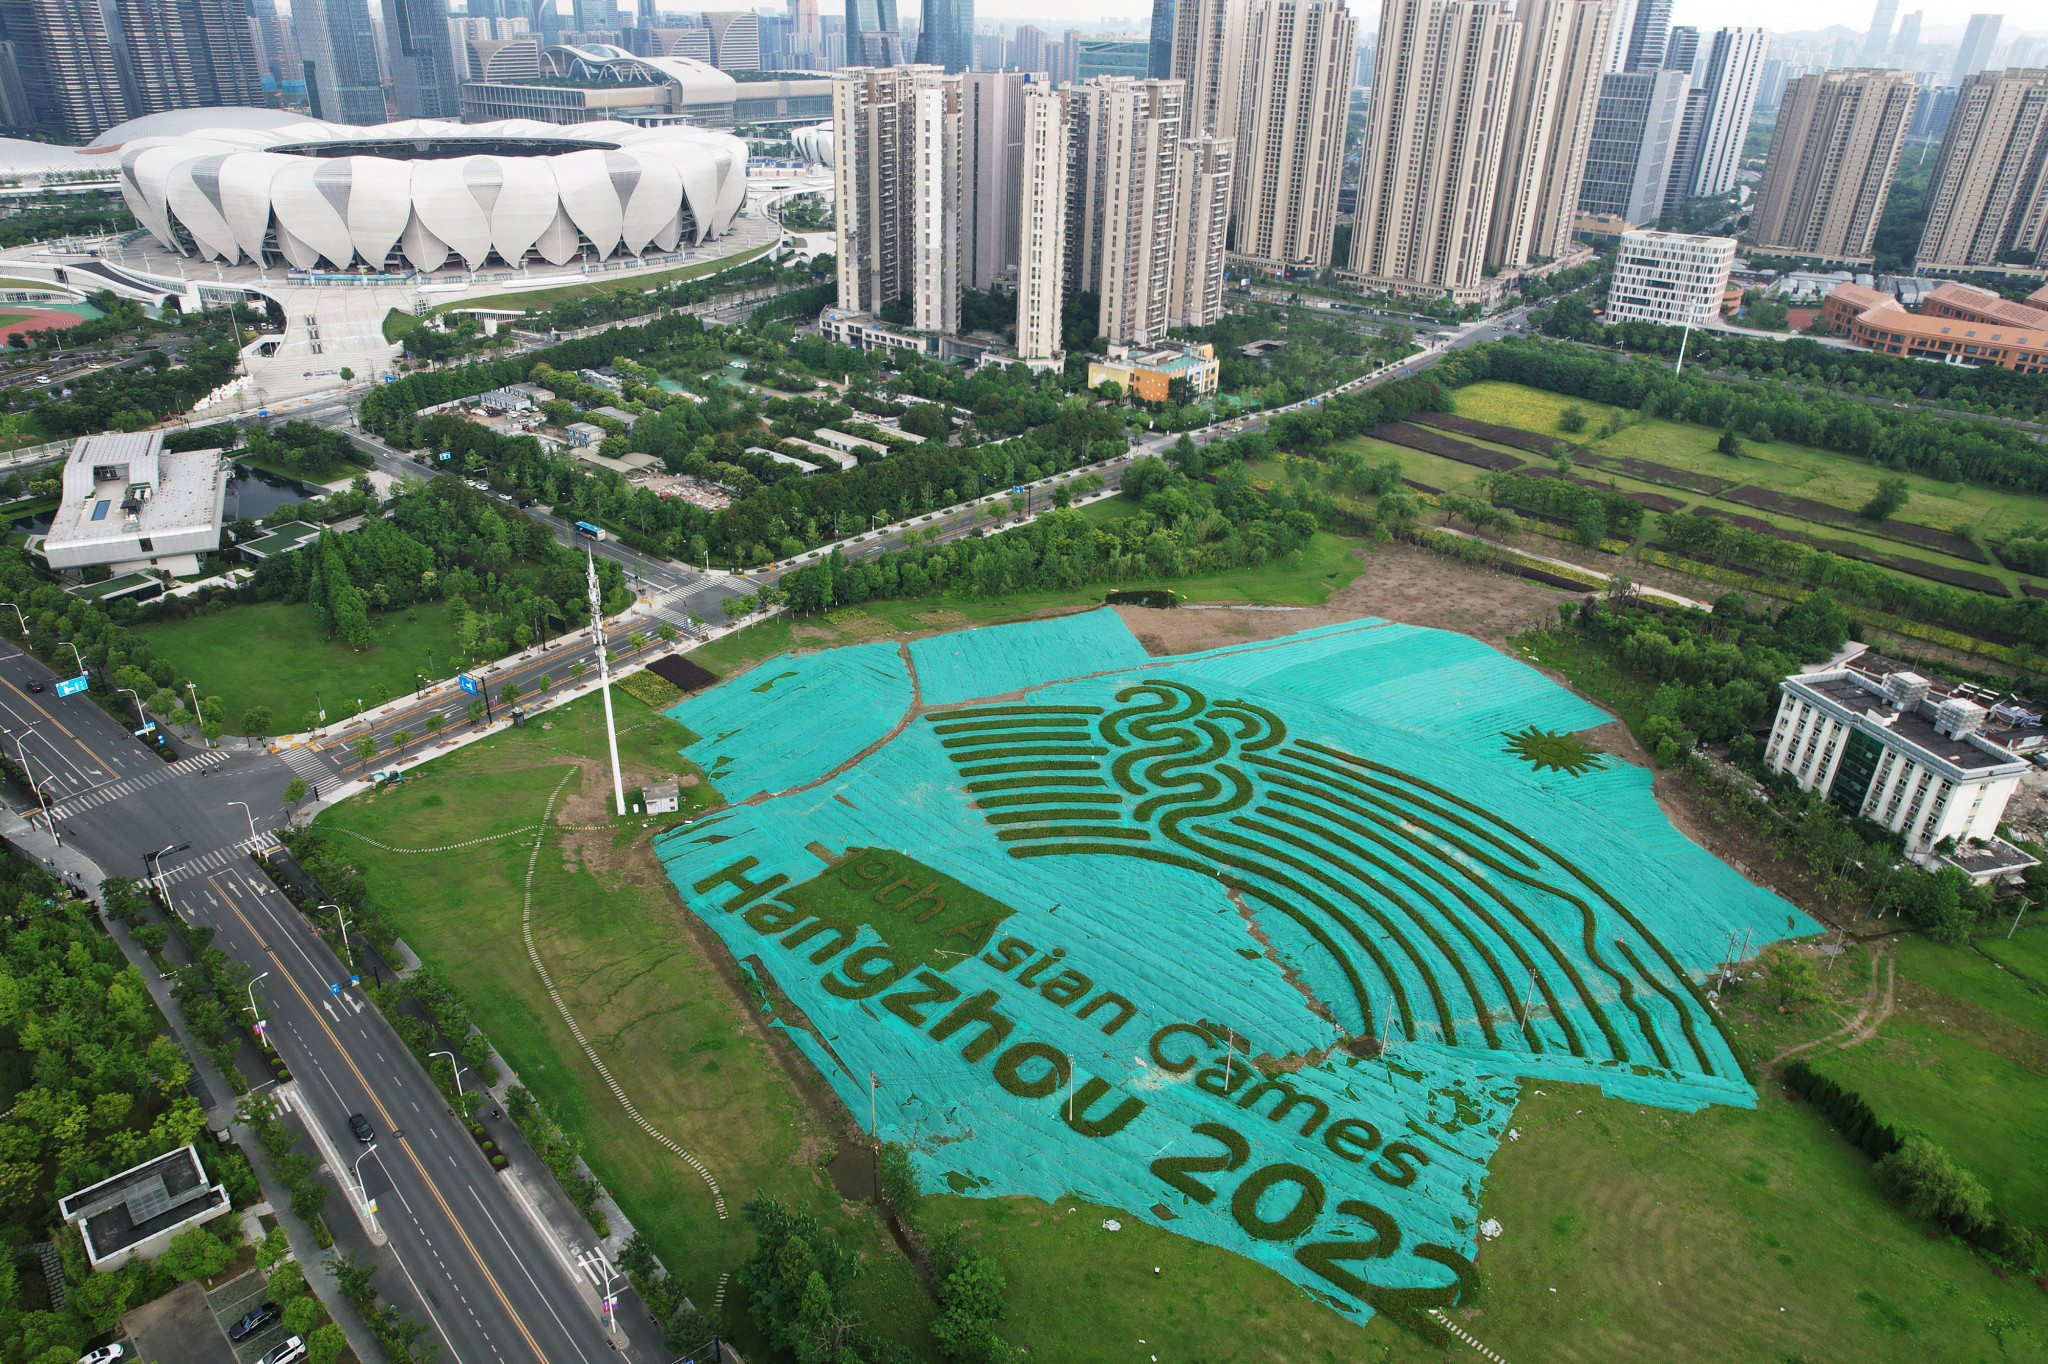 Hangzhou 2022 has reported "smooth progress" on preparations for the Asian Games and Para Games later this year ©Getty Images